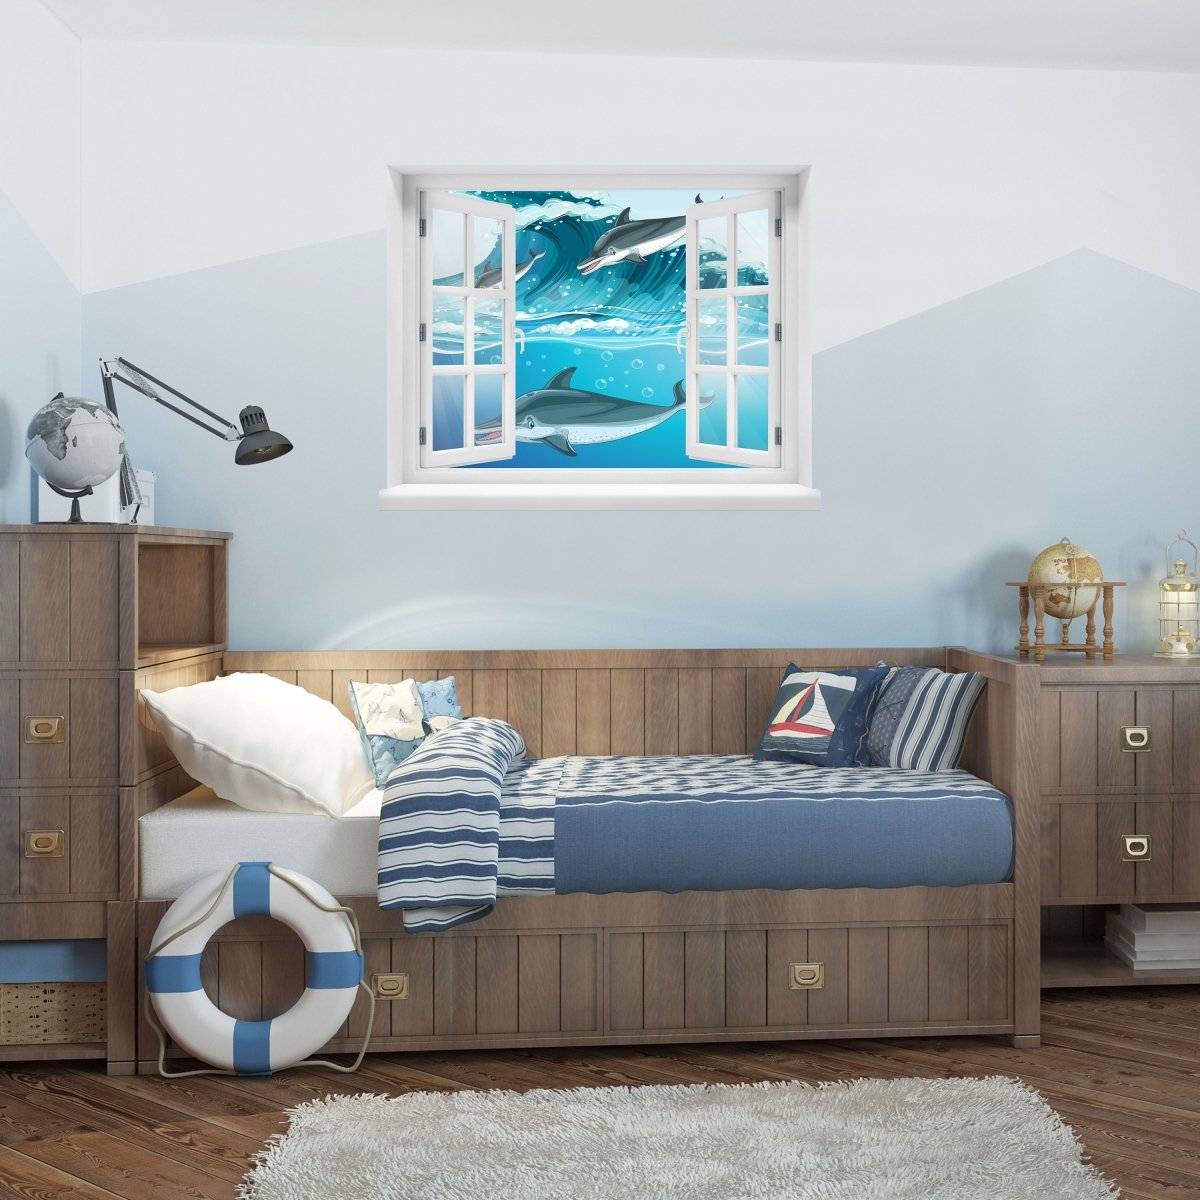 3D wall sticker dolphins in the sea, wave, water, children - Wall Decal M1225